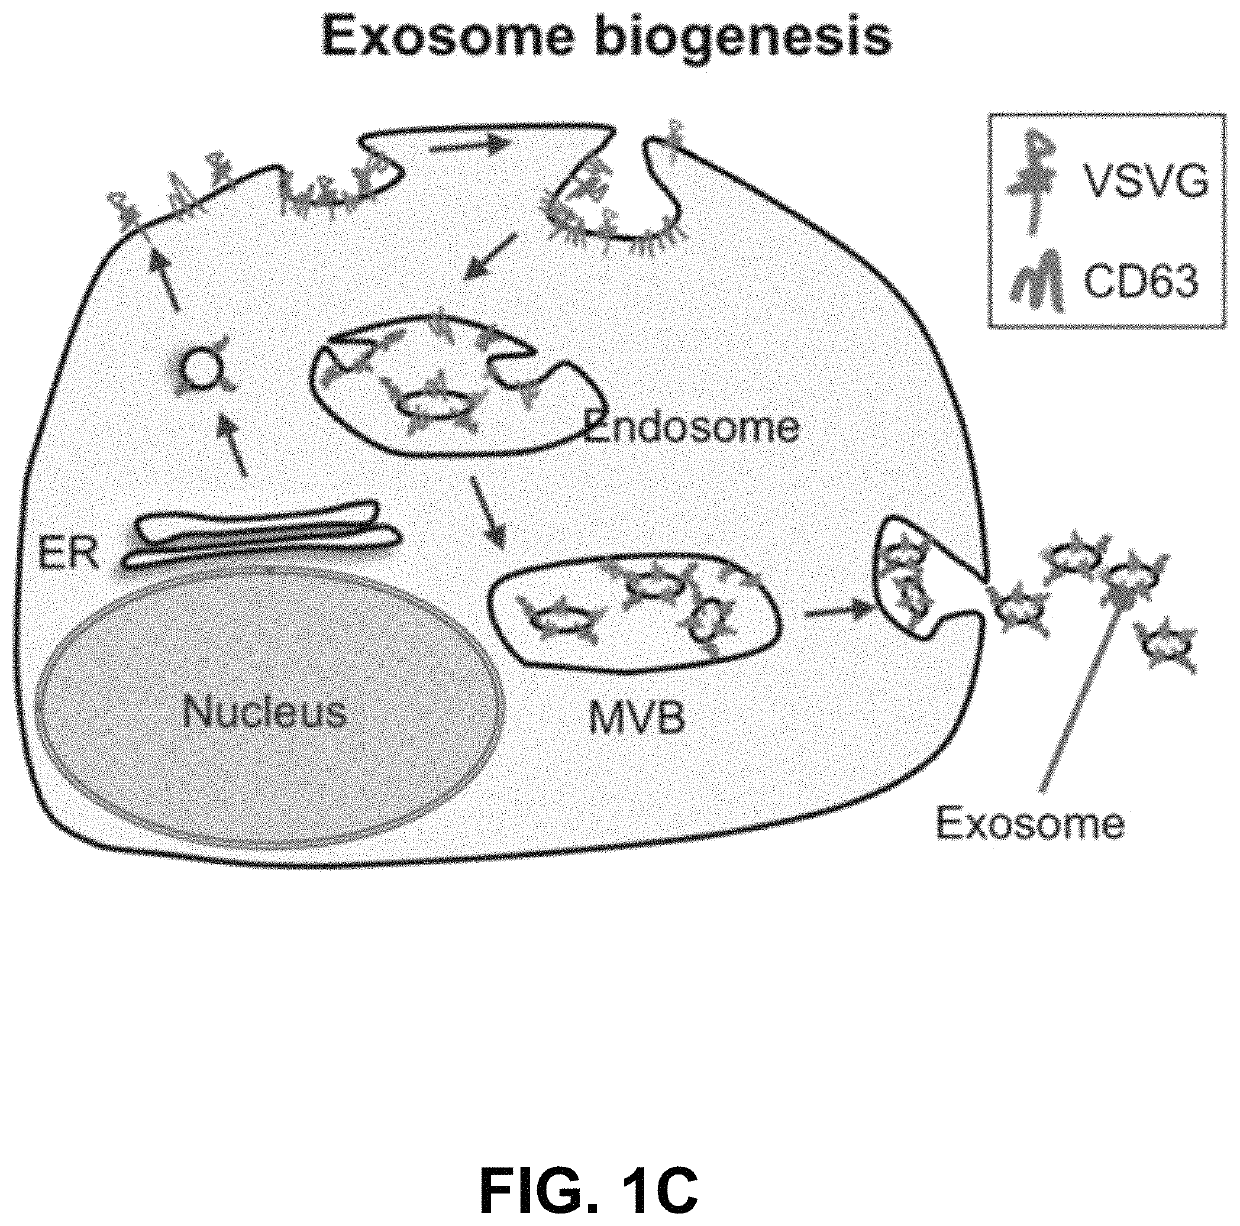 Engineered exosomes for the delivery of bioactive cargo using transmembrane VSV-G